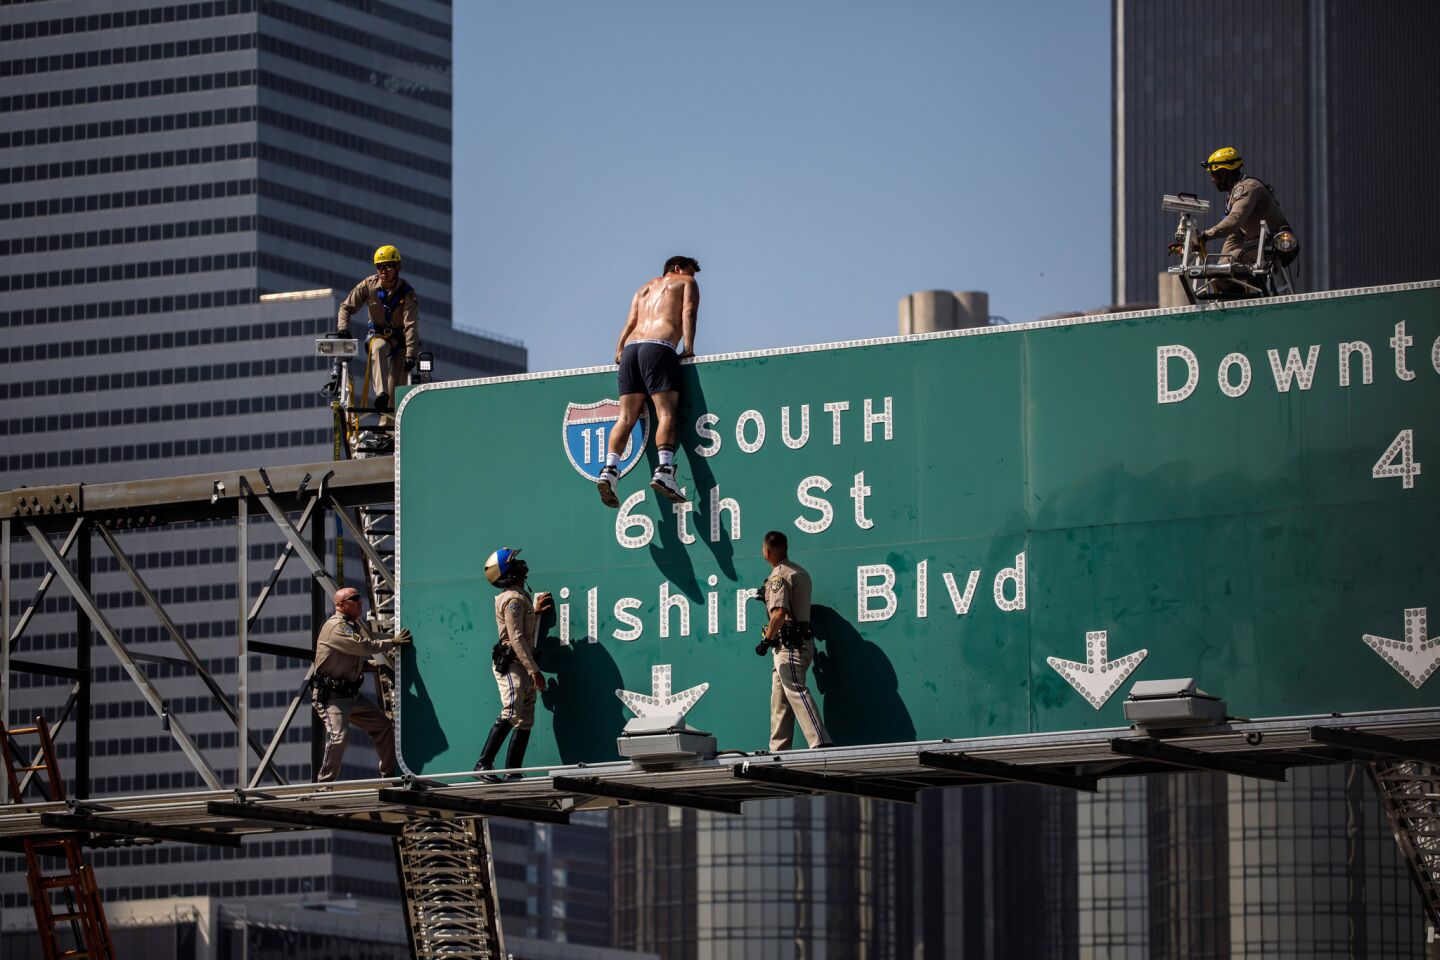 California Highway Patrol officers surround a shirtless man as he climbs a freeway sign in downtown Los Angeles.